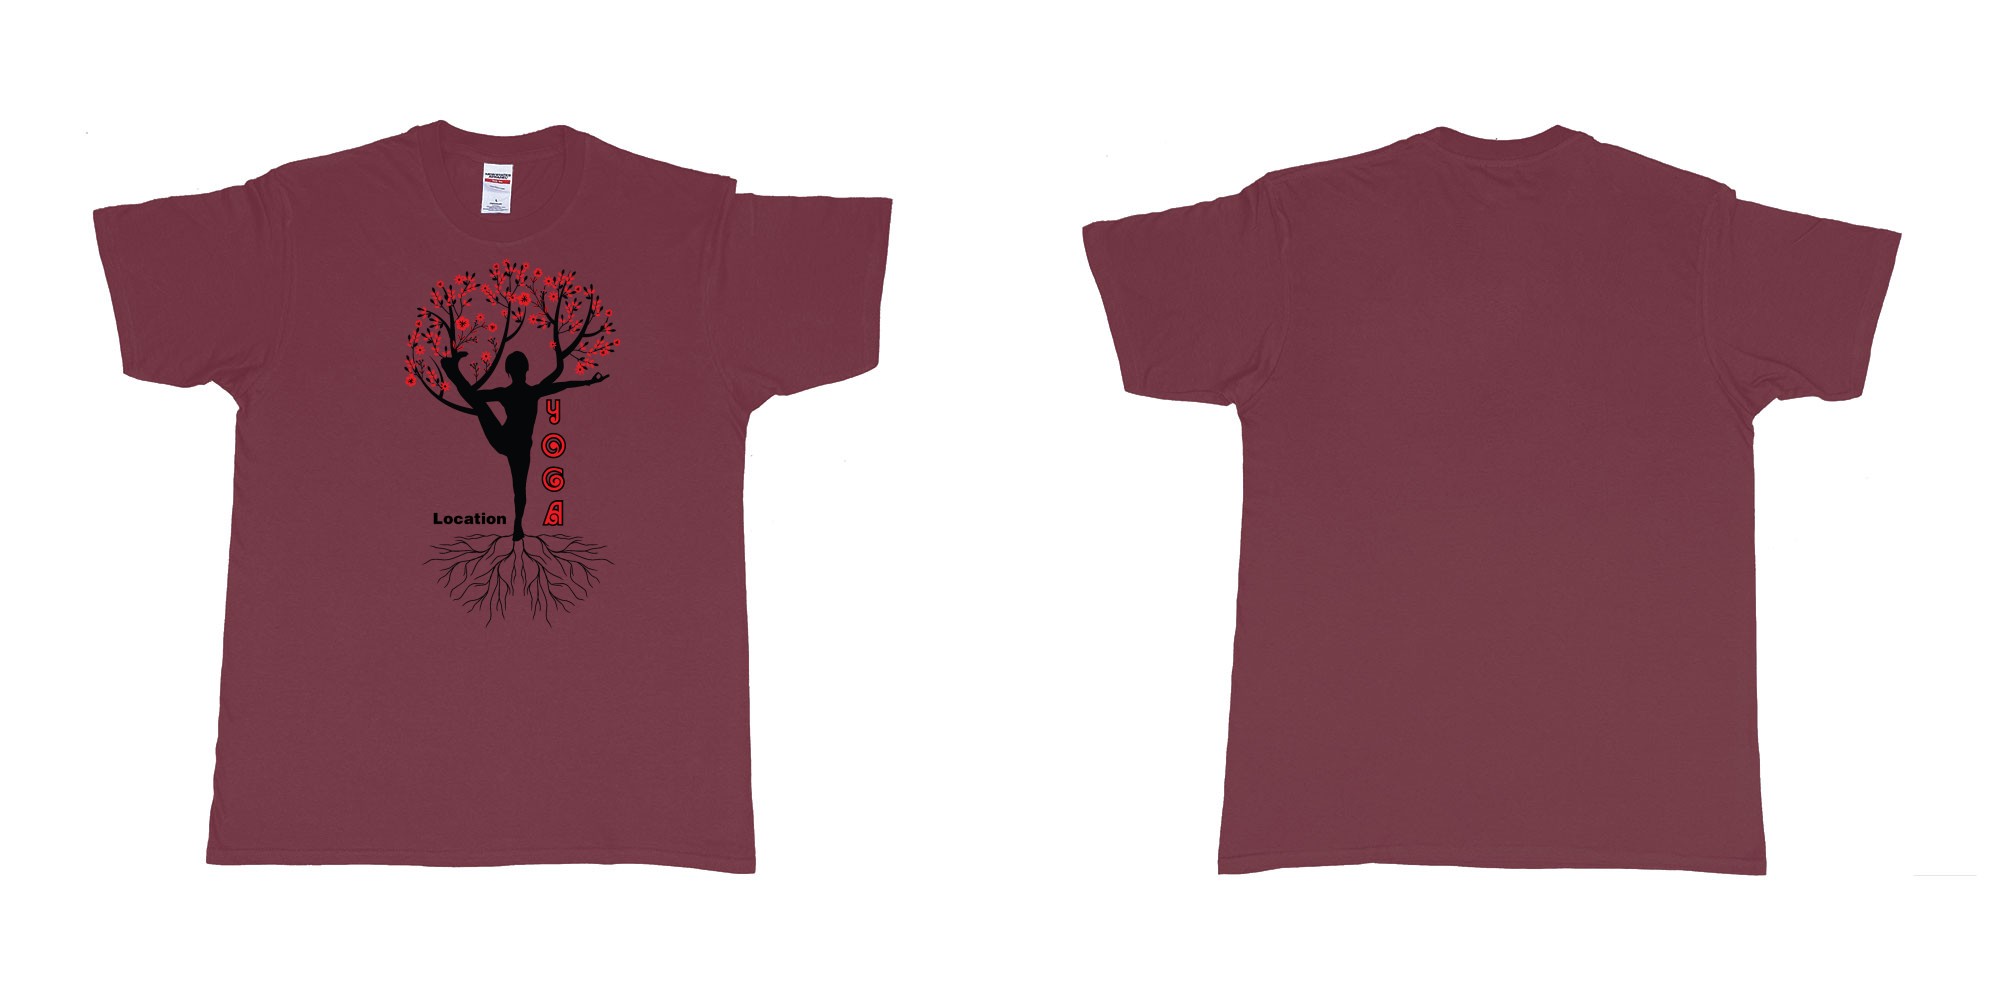 Custom tshirt design yoga tree of life is blooming own logo location design in fabric color marron choice your own text made in Bali by The Pirate Way